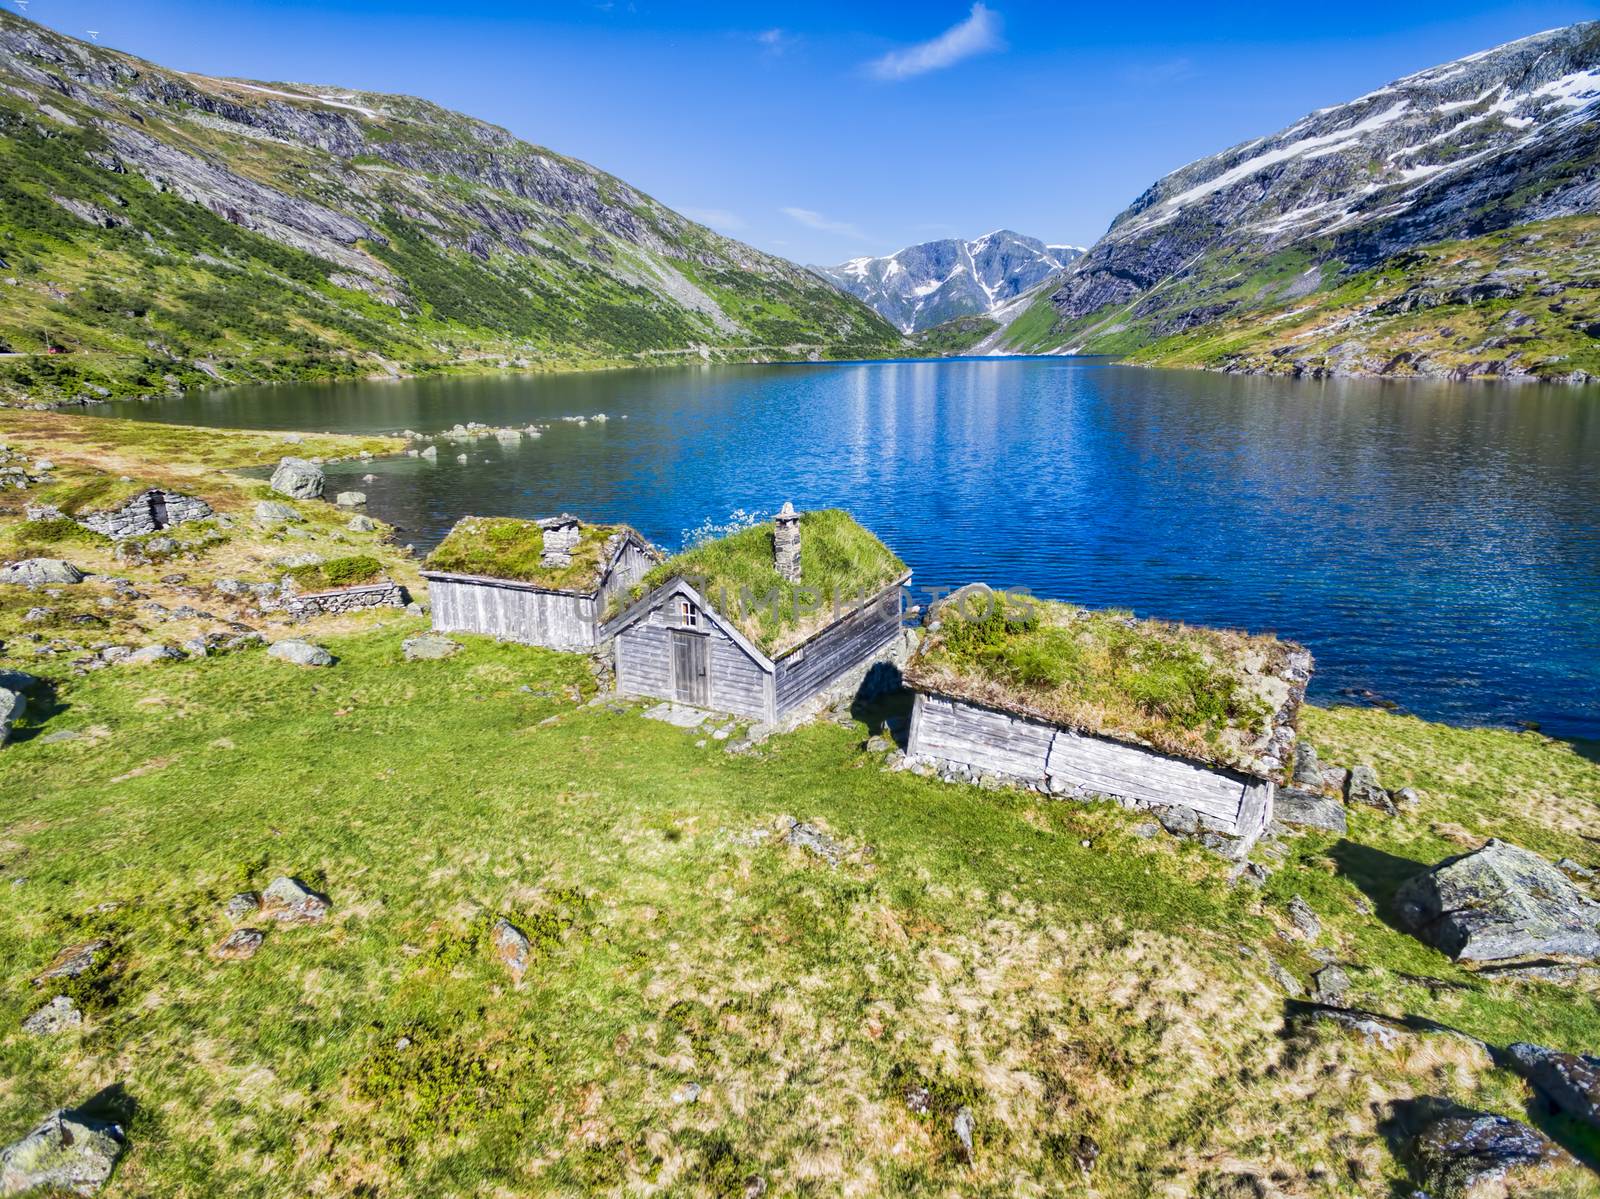 Traditional norwegian huts by picturesque lake surrounded by mountains in Gaularfjellet mountain pass in Norway